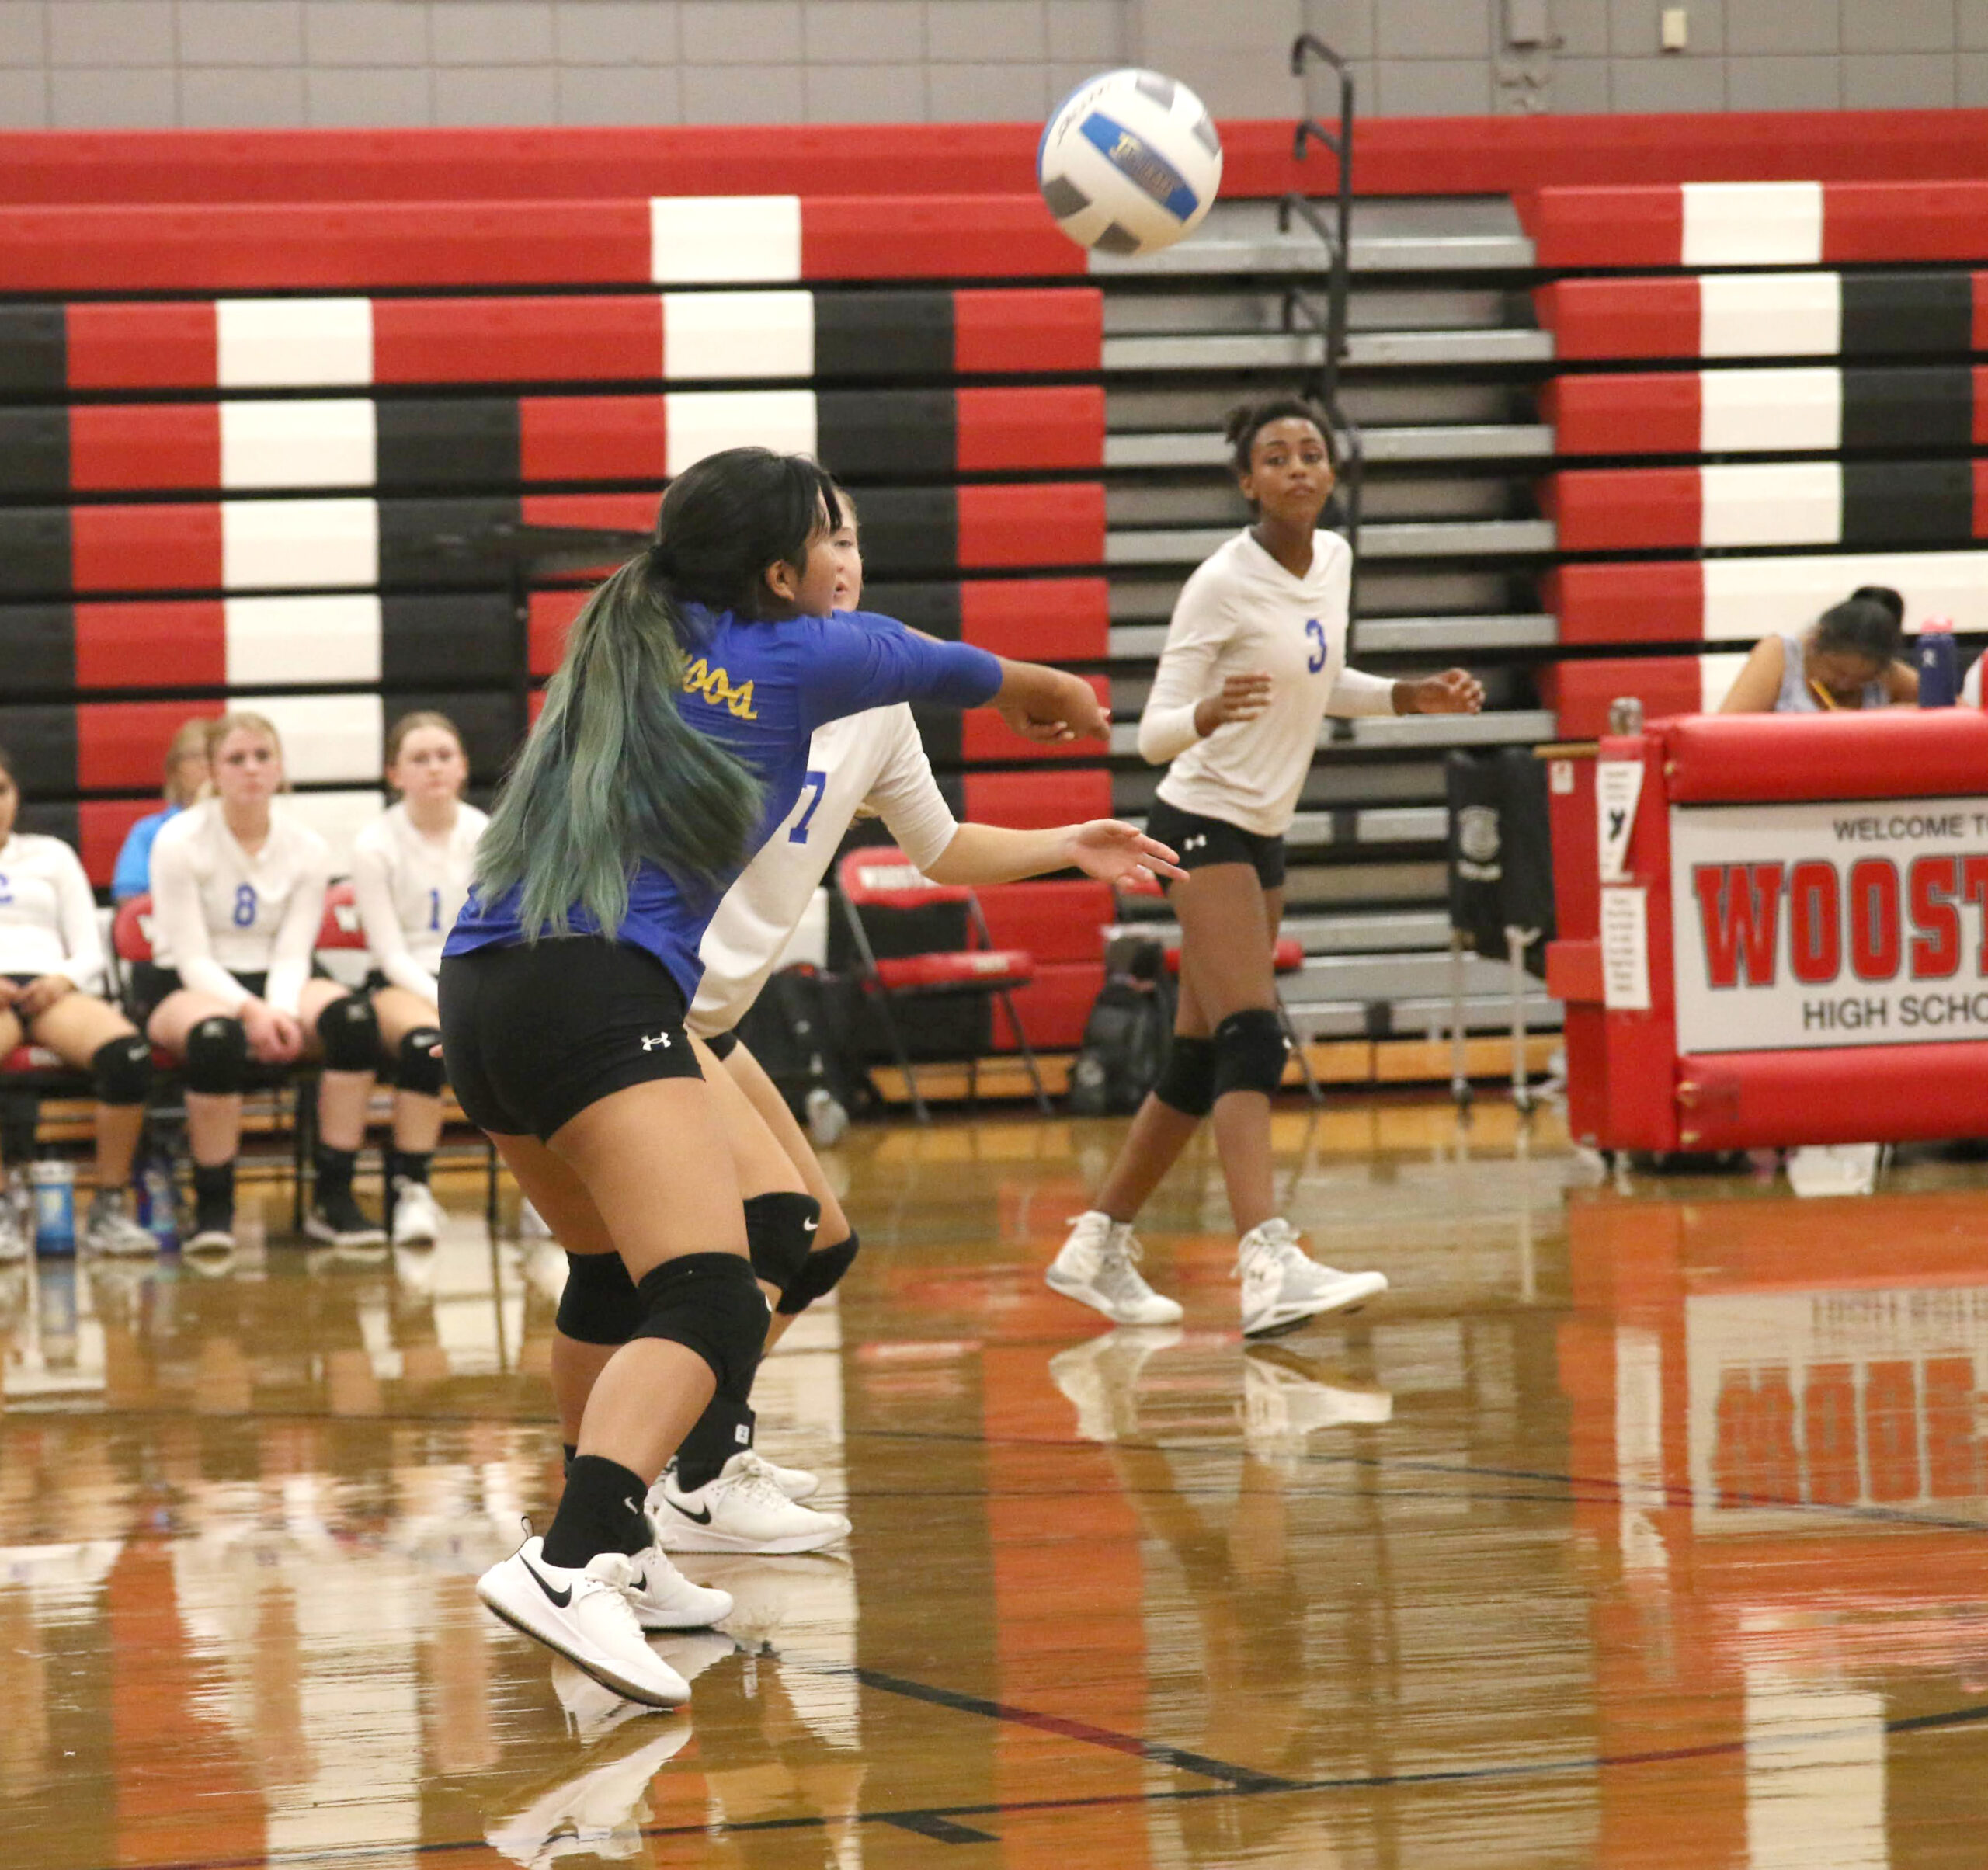 For JV volleyball, as skills grow, so does teamwork  